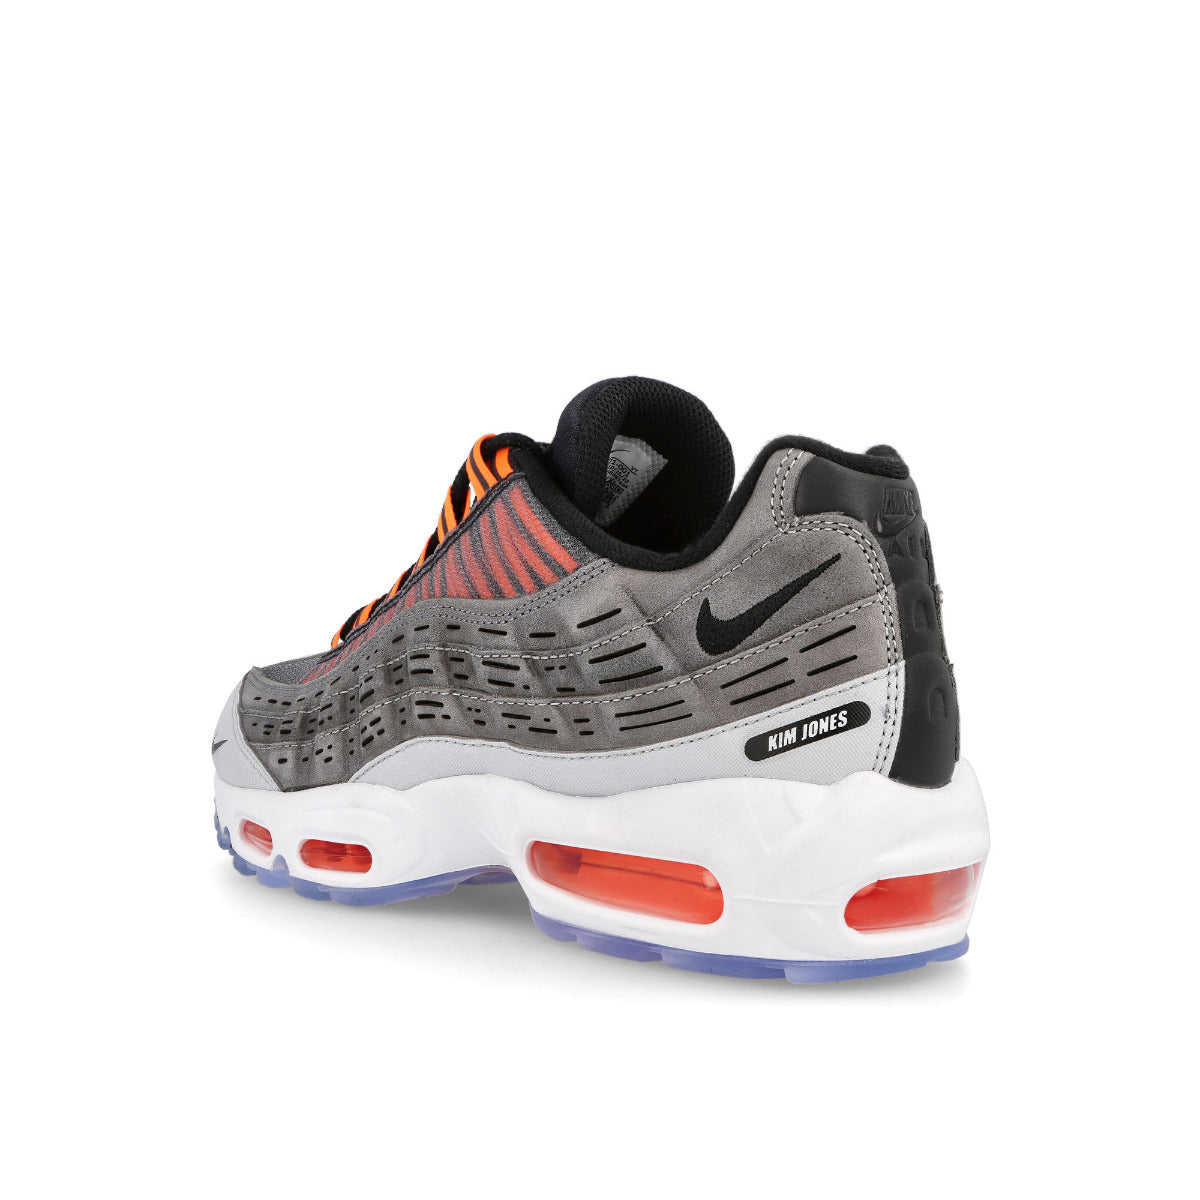 Release Details: The Kim Jones x Nike Air Max 95 Collection